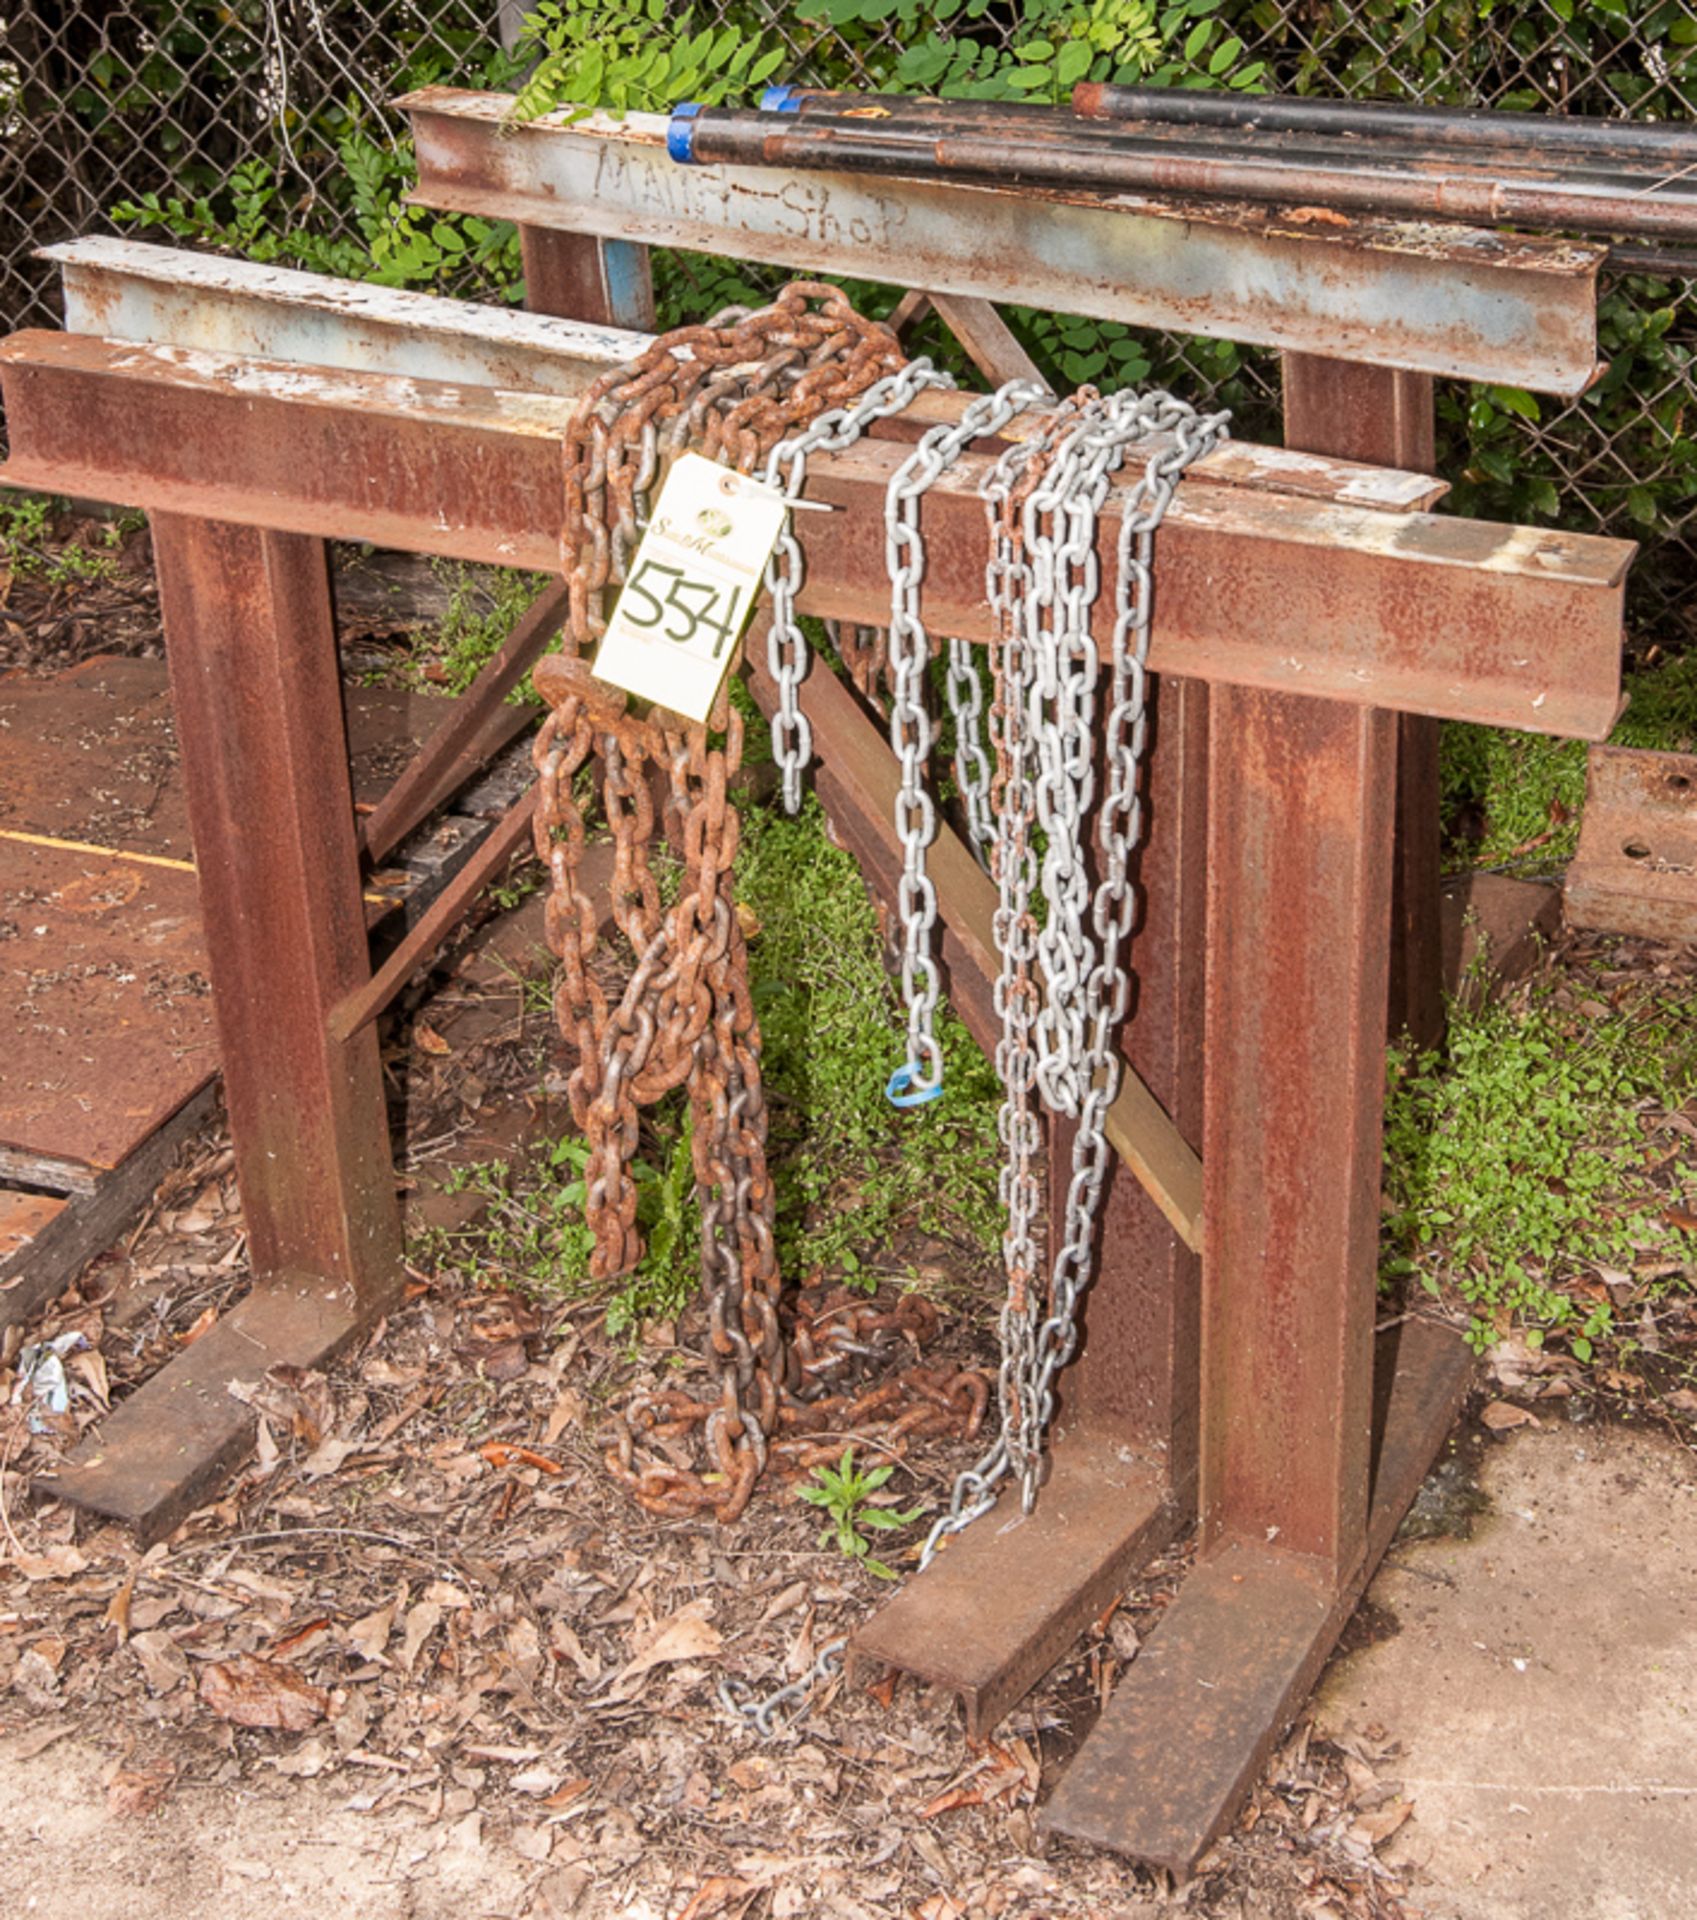 3)Metal stands, chain